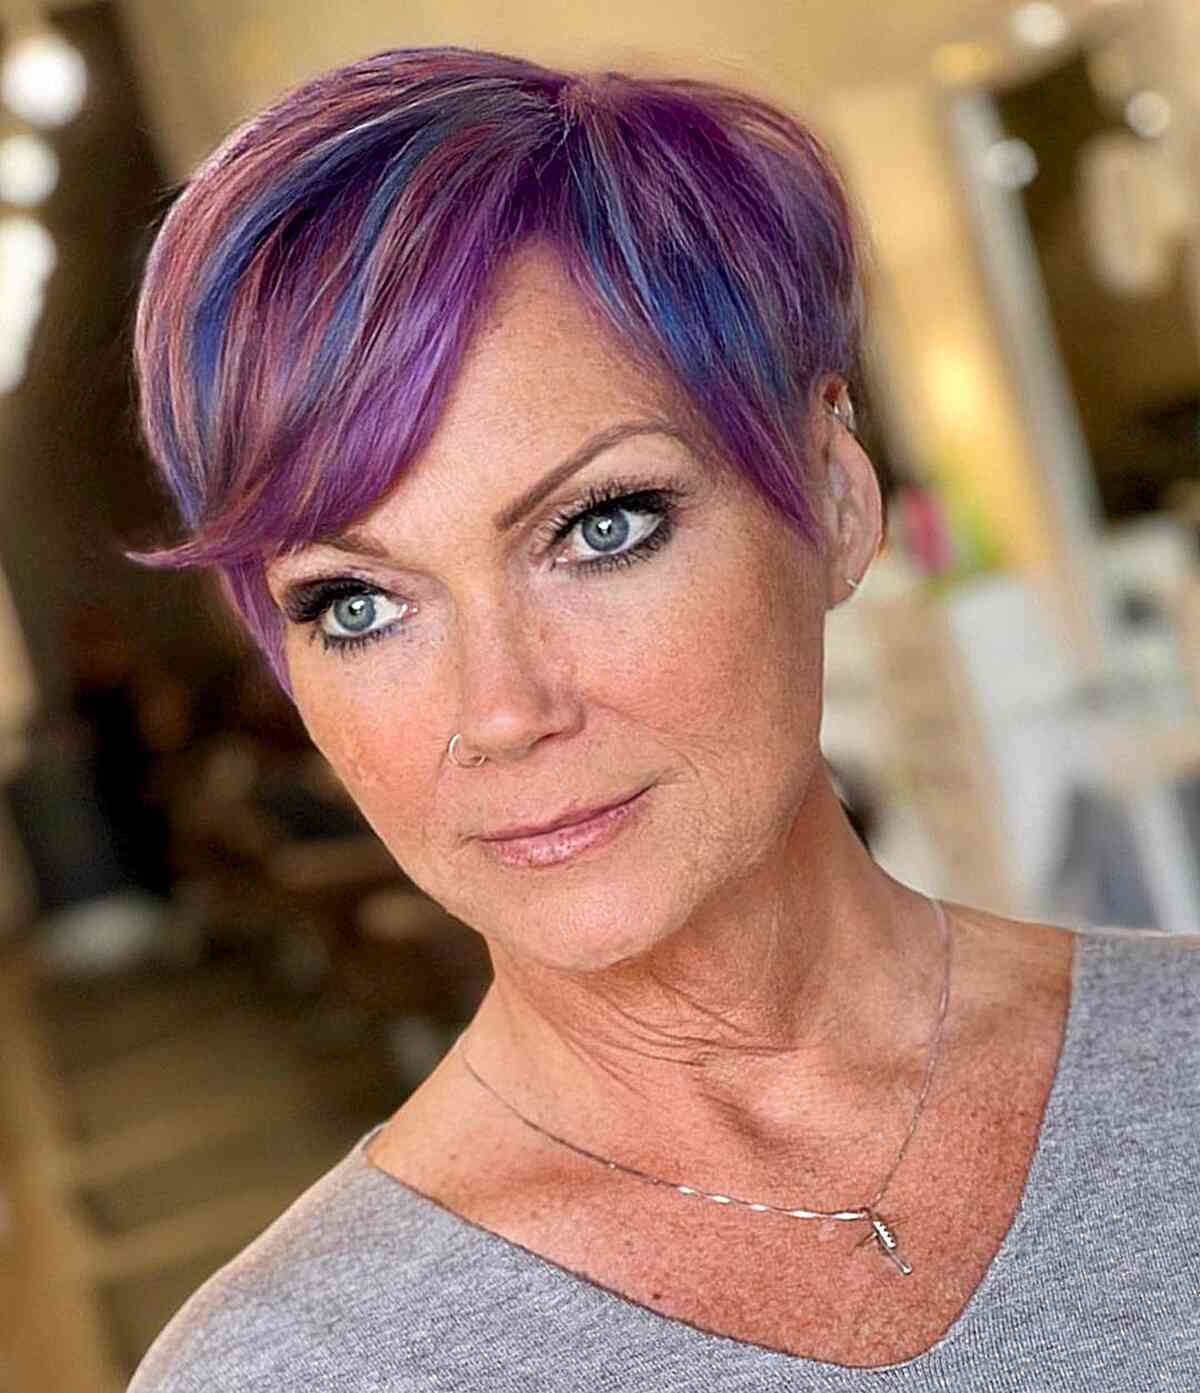 Short Colorful Blue and Purple Pixie Cut with a Side Part and Side Bangs